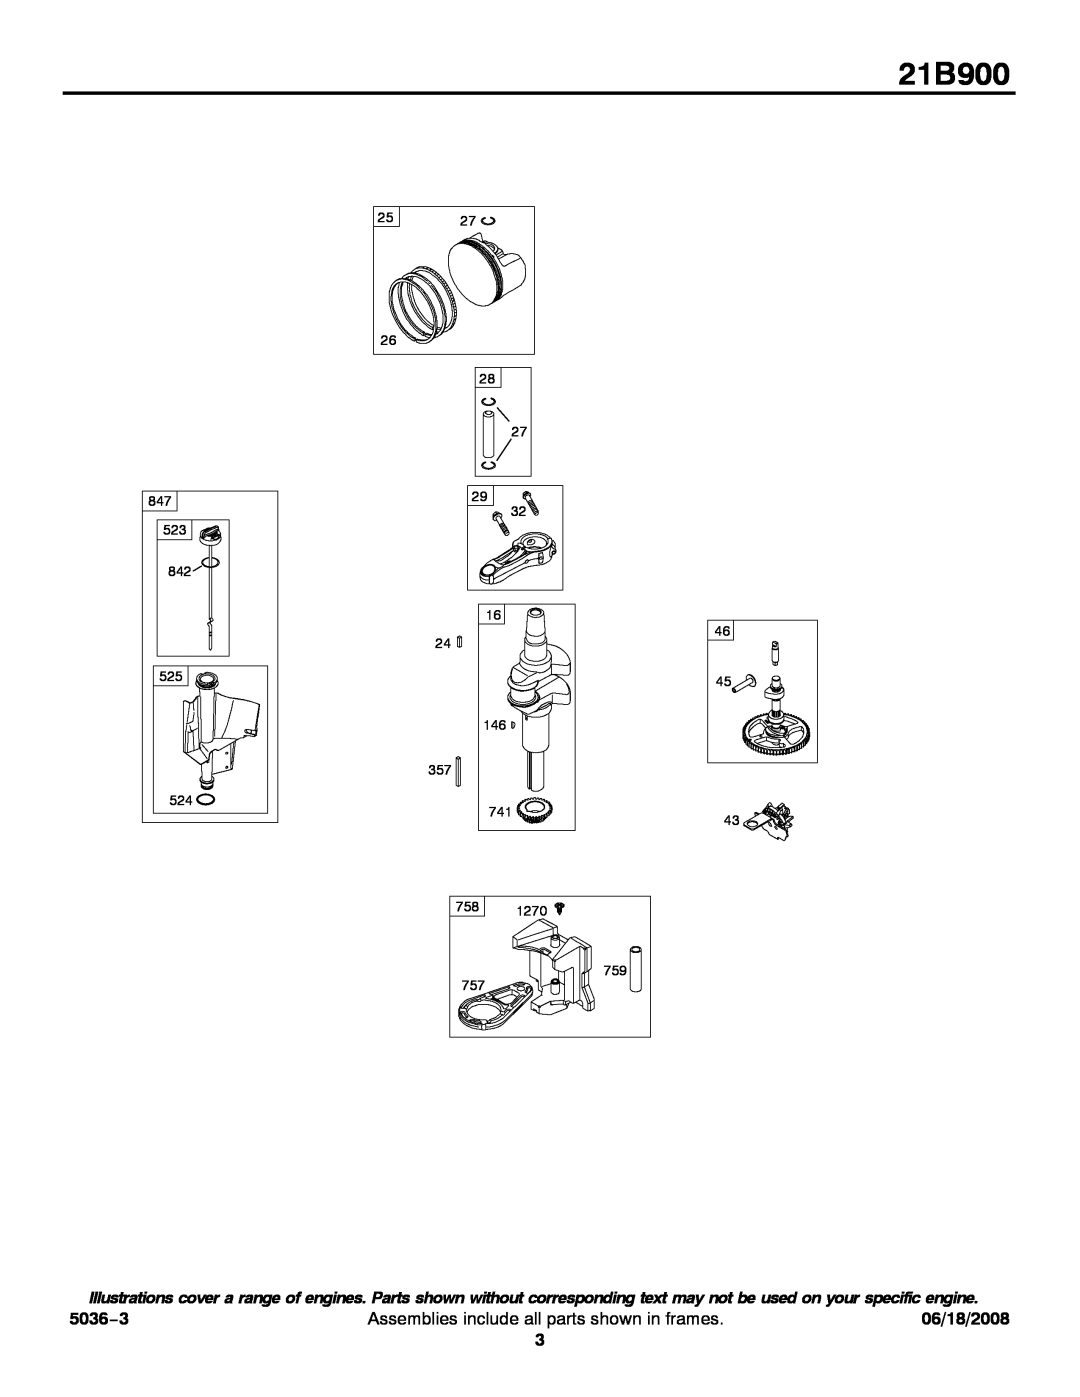 Briggs & Stratton 21B900 service manual 5036−3, Assemblies include all parts shown in frames, 06/18/2008 